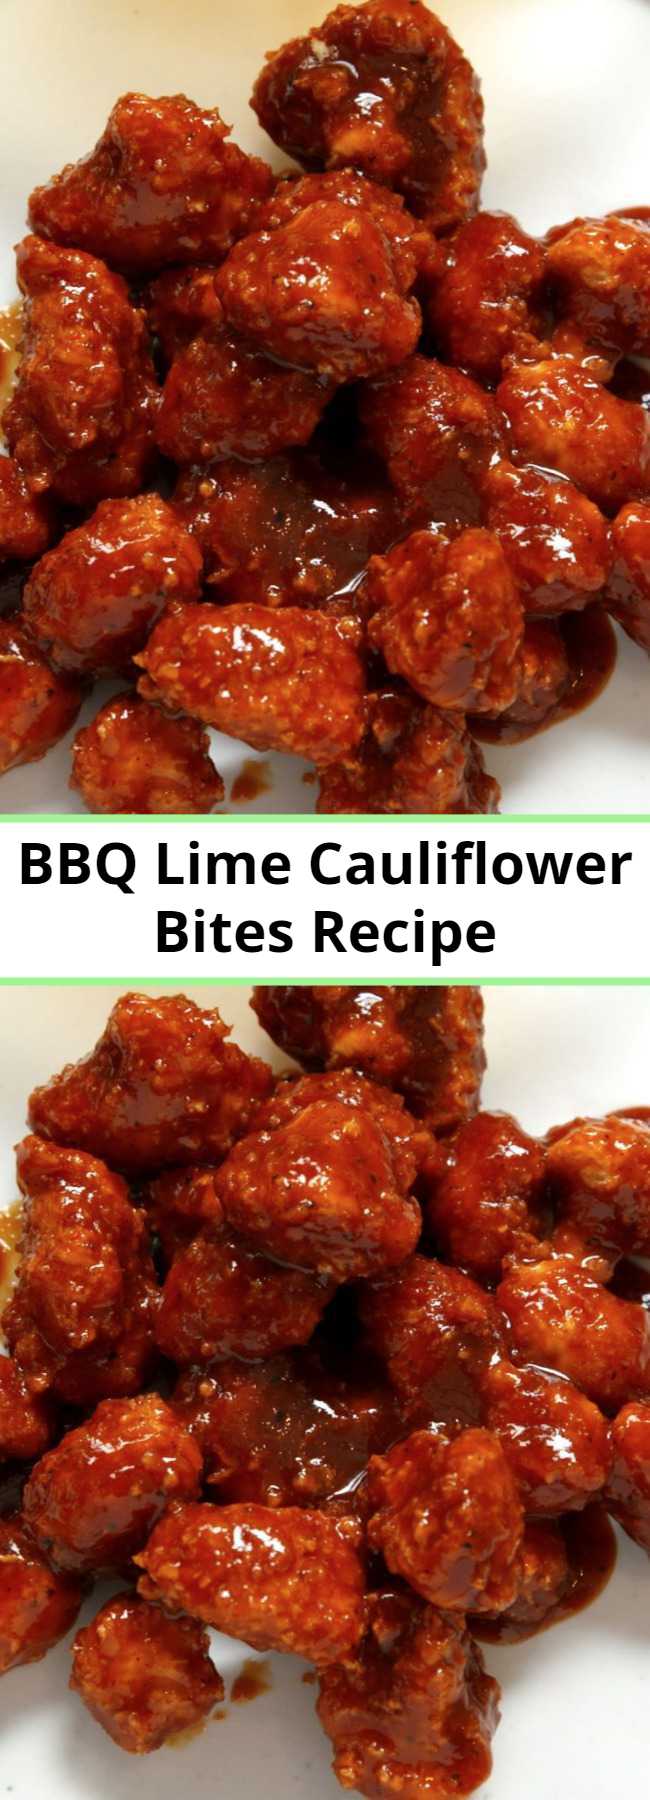 BBQ Lime Cauliflower Bites Recipe - One floret and you'll know why we love this cauliflower so much. The sweet sauce and crunchy cauliflower will feel like you're eating popcorn chicken. Honestly, we love the veggie version more. #easy #recipe #cauliflower #lowcarb #healthy #ranch #ranchdip #barbecue #keto